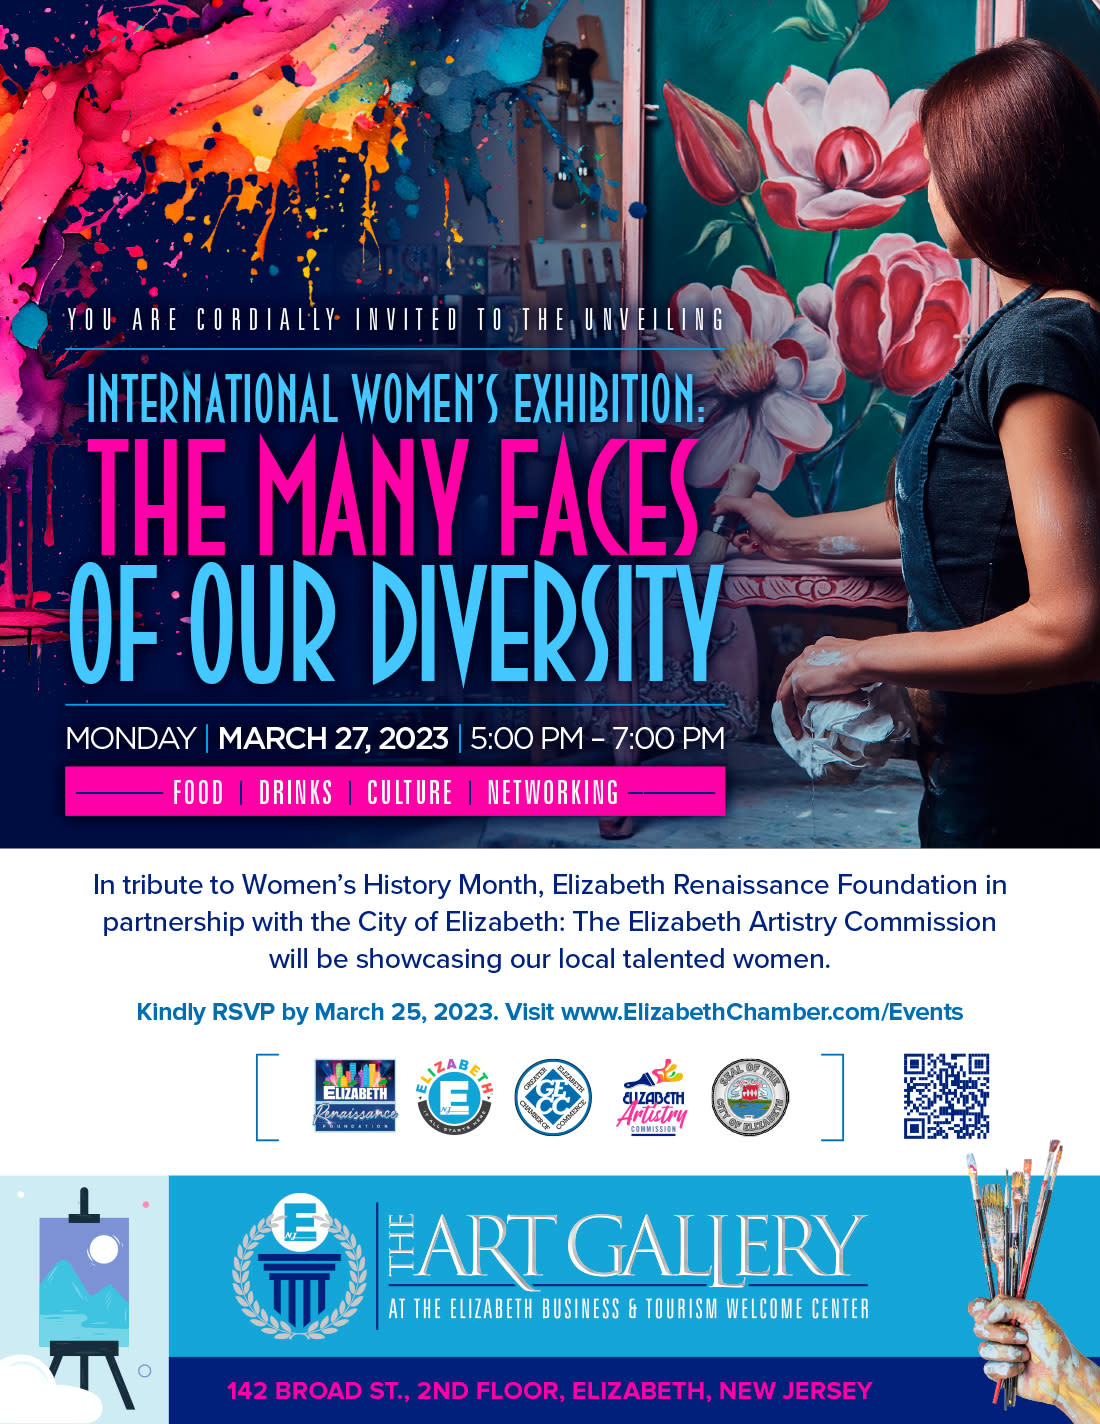 Art Gallery - International Women's Exhibition - The Many Faces of Our Diversity